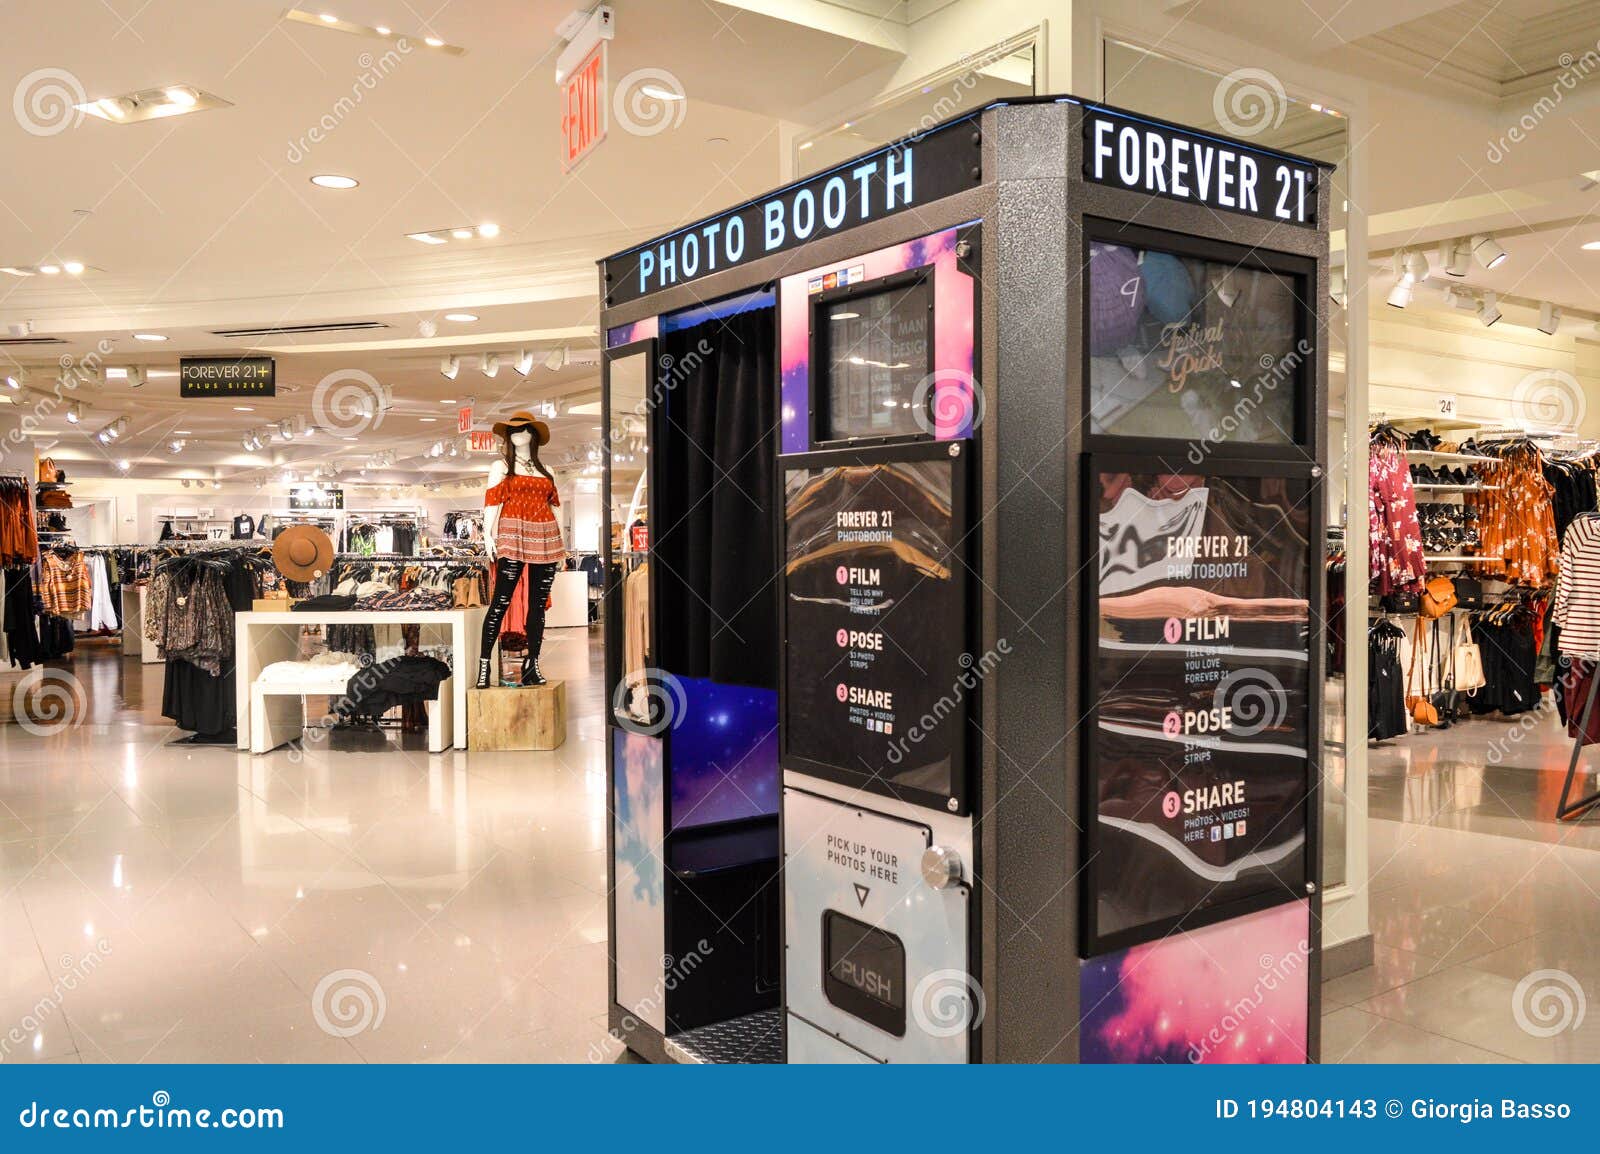 Forever 21 Photobooth Indoor Store in Times Square, Manhattan, New York  City Editorial Stock Photo - Image of cityscape, cold: 194804143